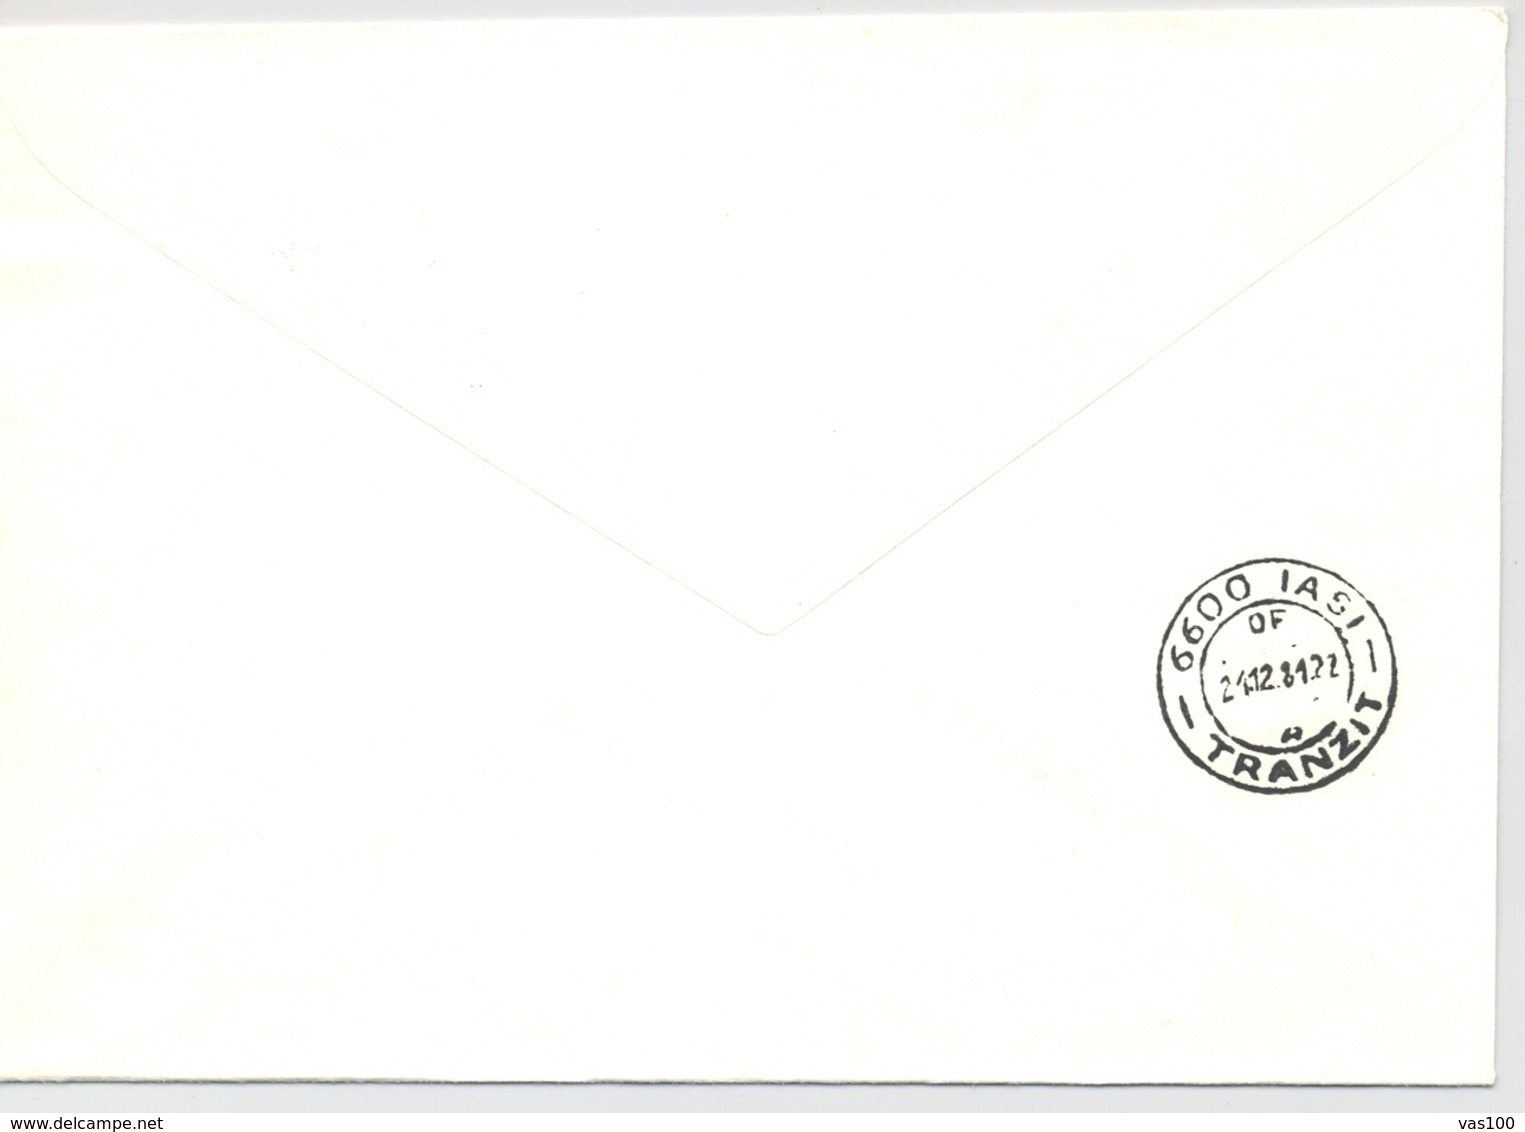 PEACE ON EARTH PHILATELIC EXHIBITION SPECIAL POSTMARK, ENDLESS COLUMN STAMP ON COVER, 1981, ROMANIA - Covers & Documents